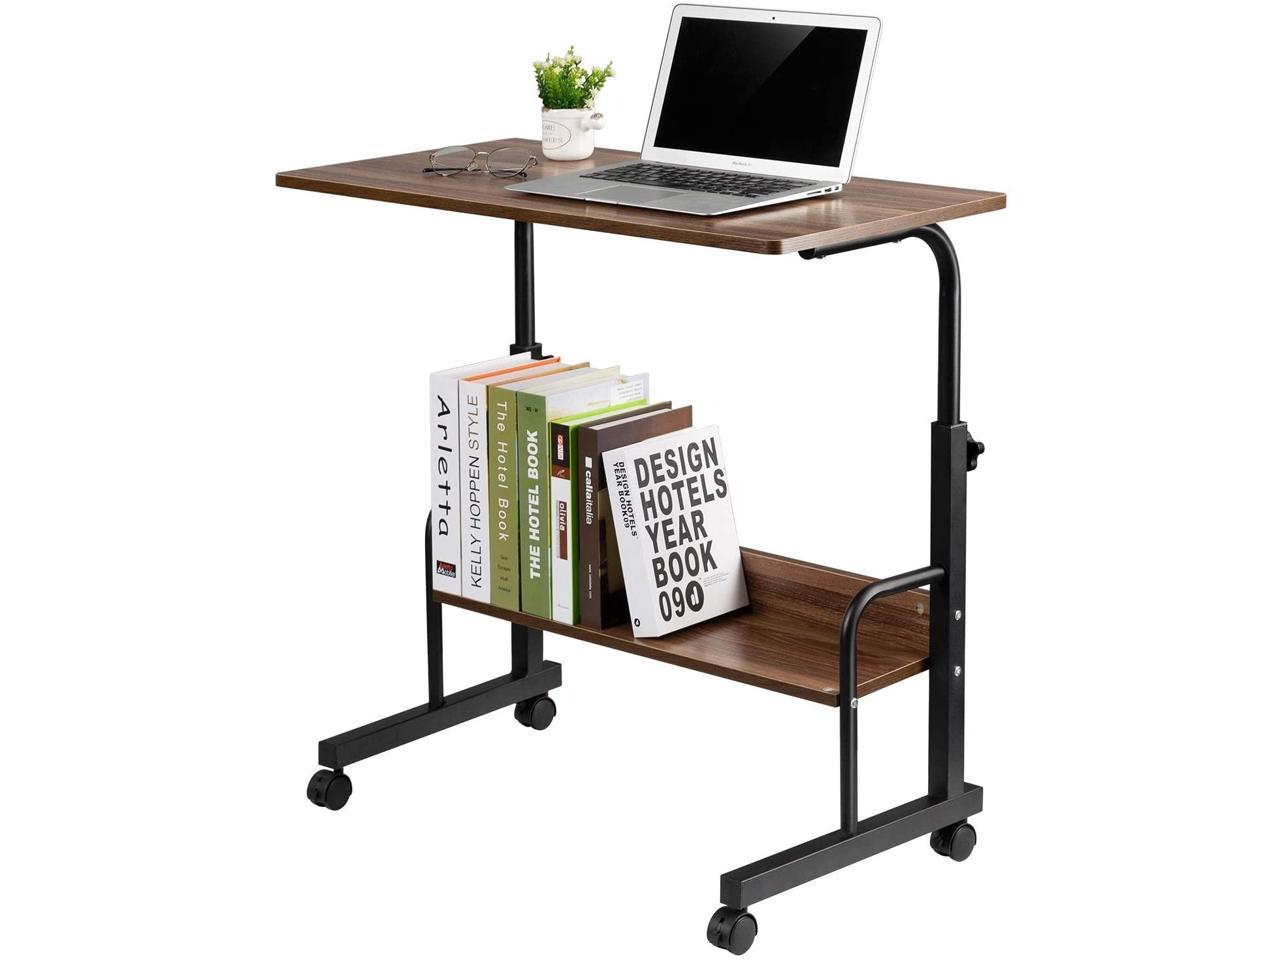 Computer Stand Rolling Cart-b Mobile Laptop Table Overbed Table Cart with Tilting,Tray Side Table Adjustable Height Laptop Desk Cart